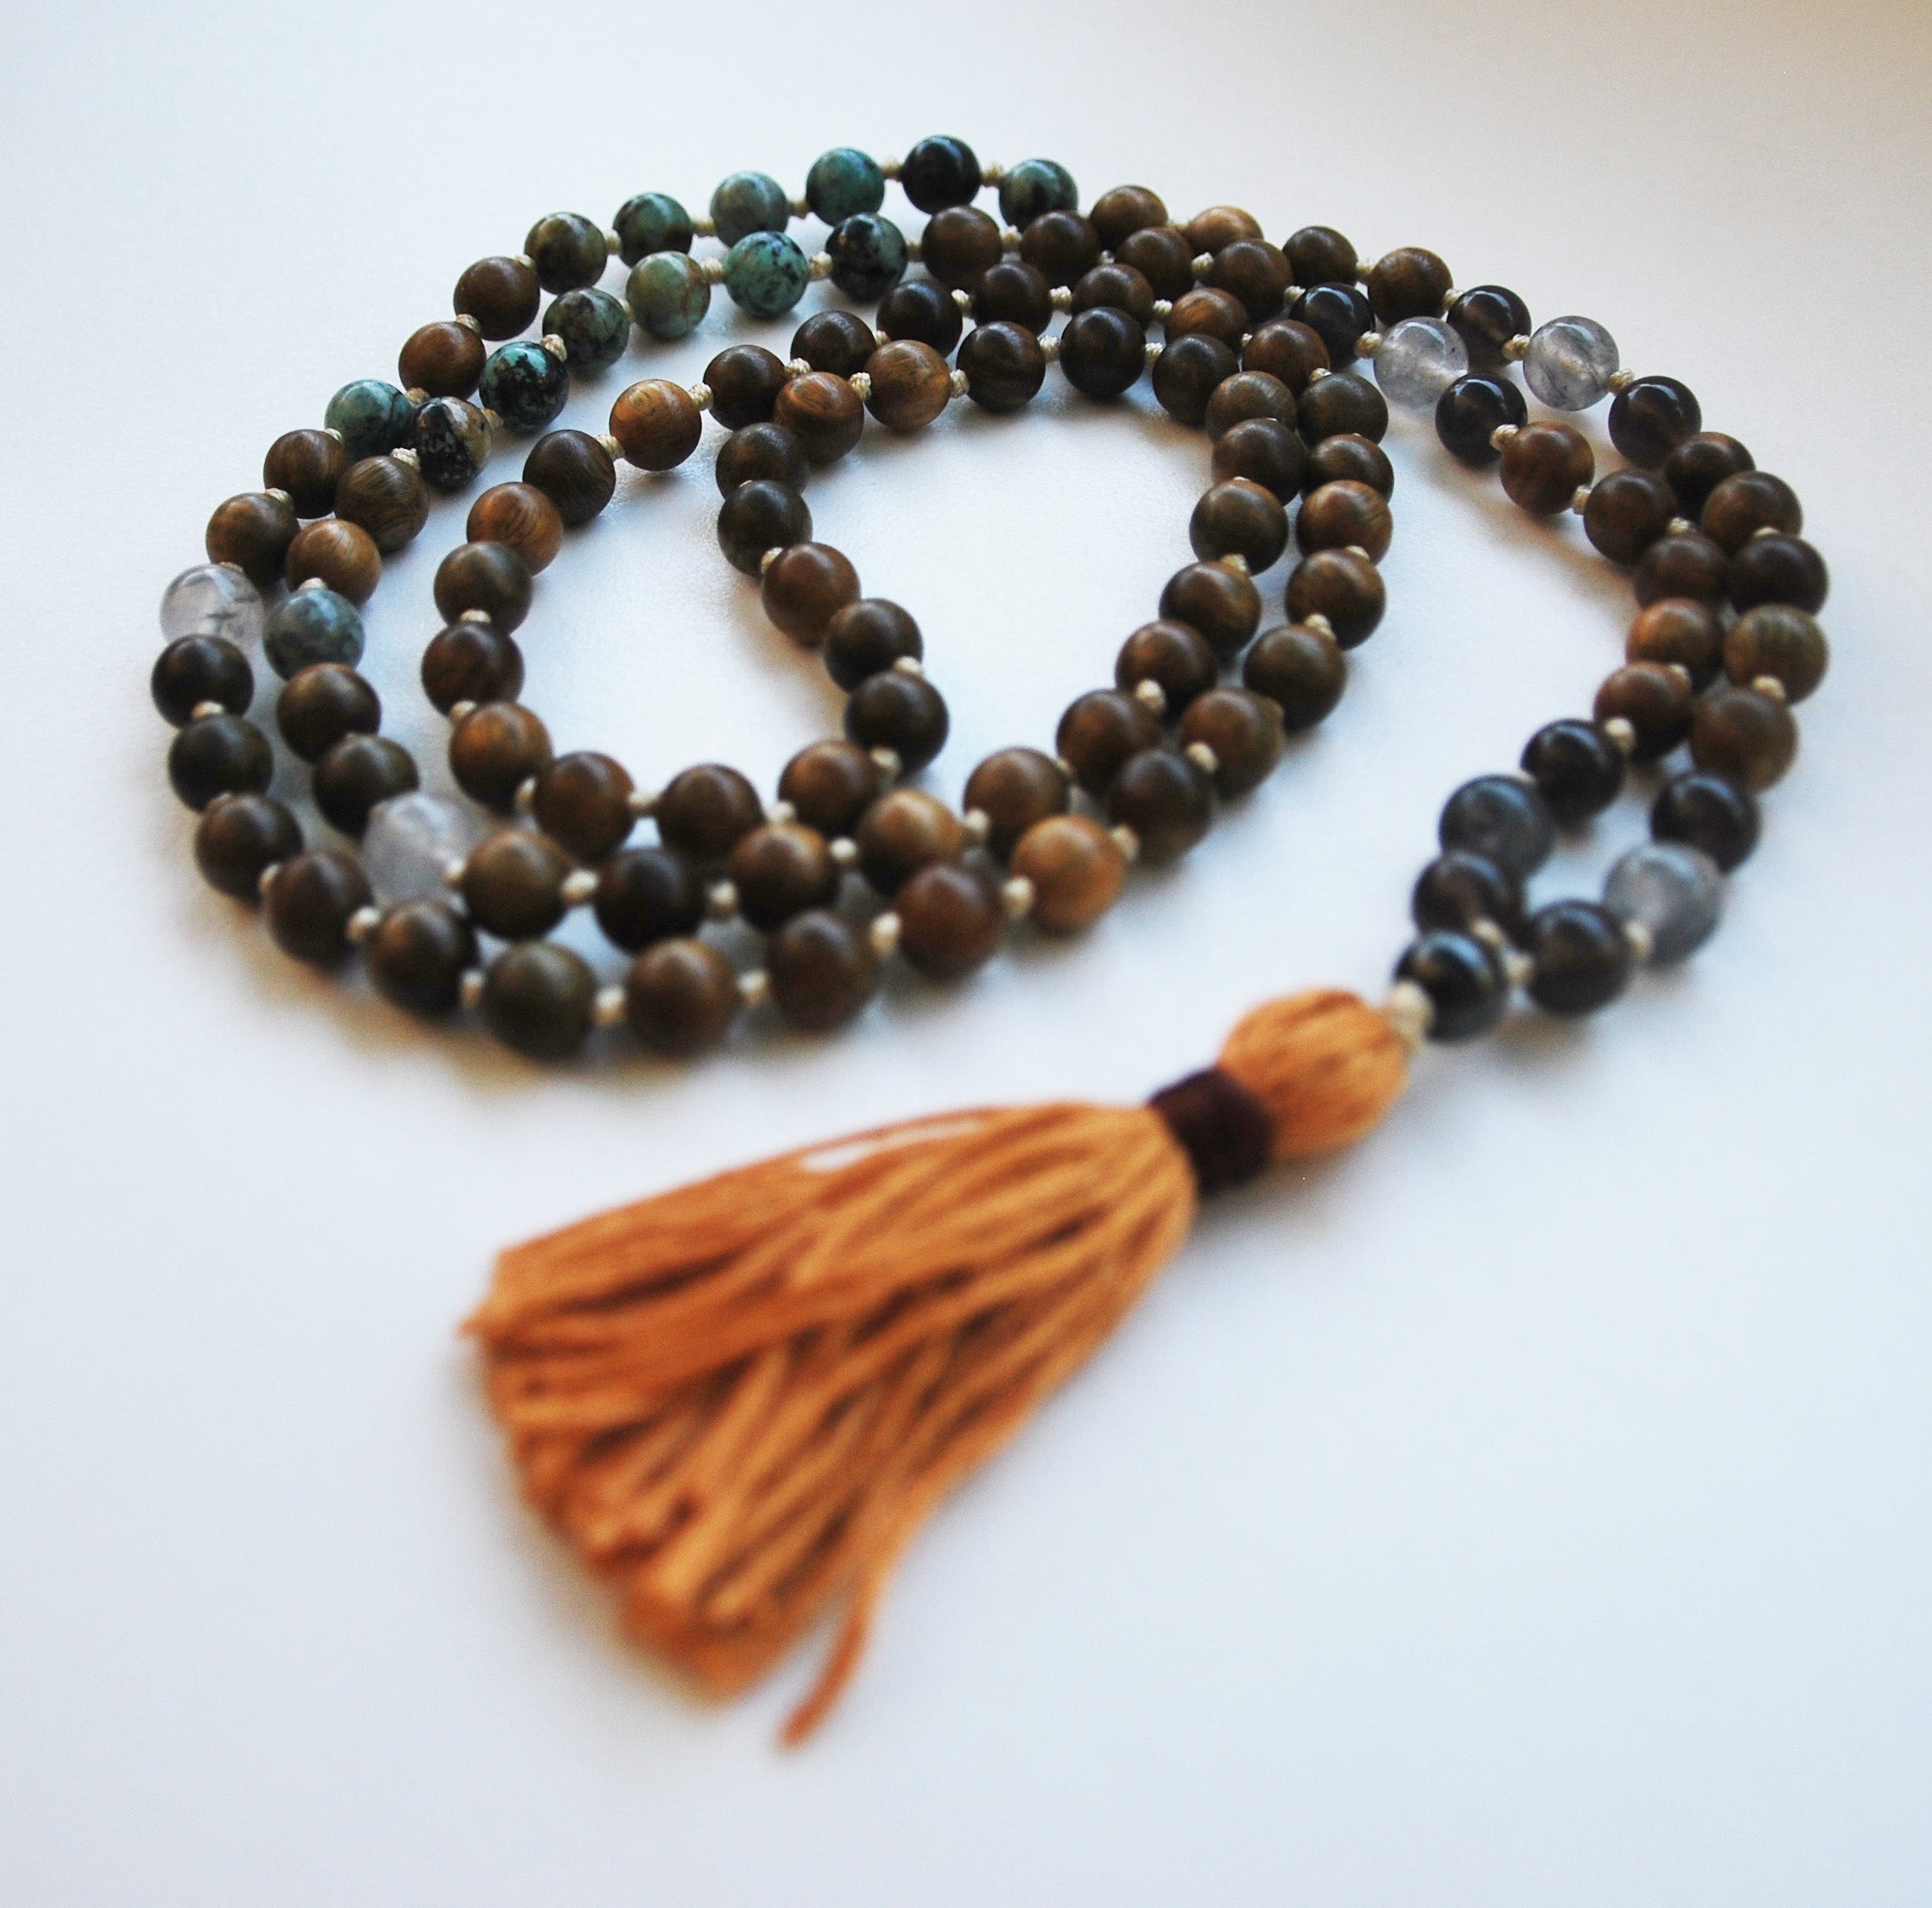 8mm Green Sandalwood & African Turquoise 108 Knotted Mala Necklace with Cotton Tassel